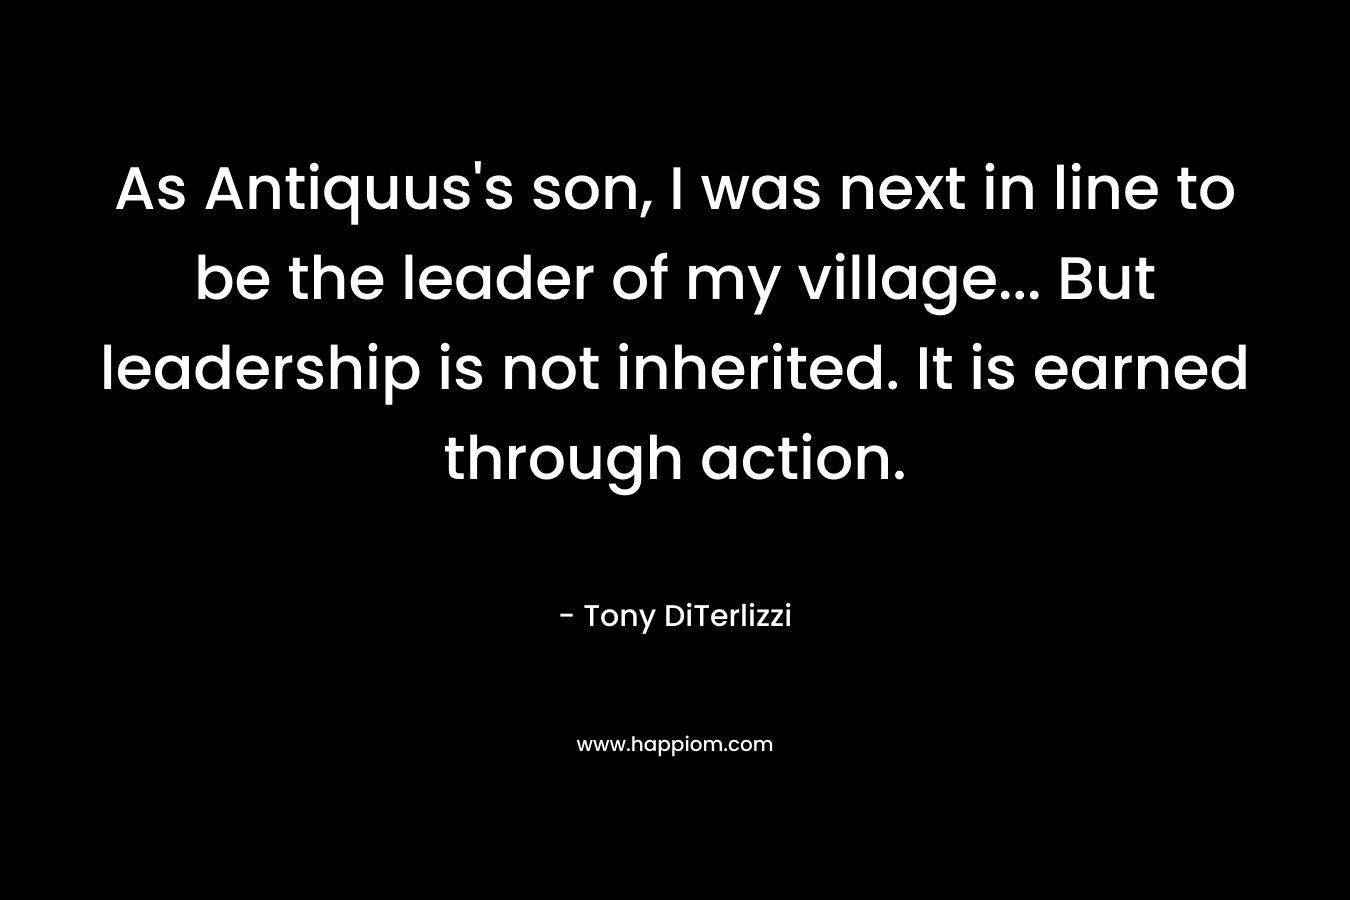 As Antiquus’s son, I was next in line to be the leader of my village… But leadership is not inherited. It is earned through action. – Tony DiTerlizzi